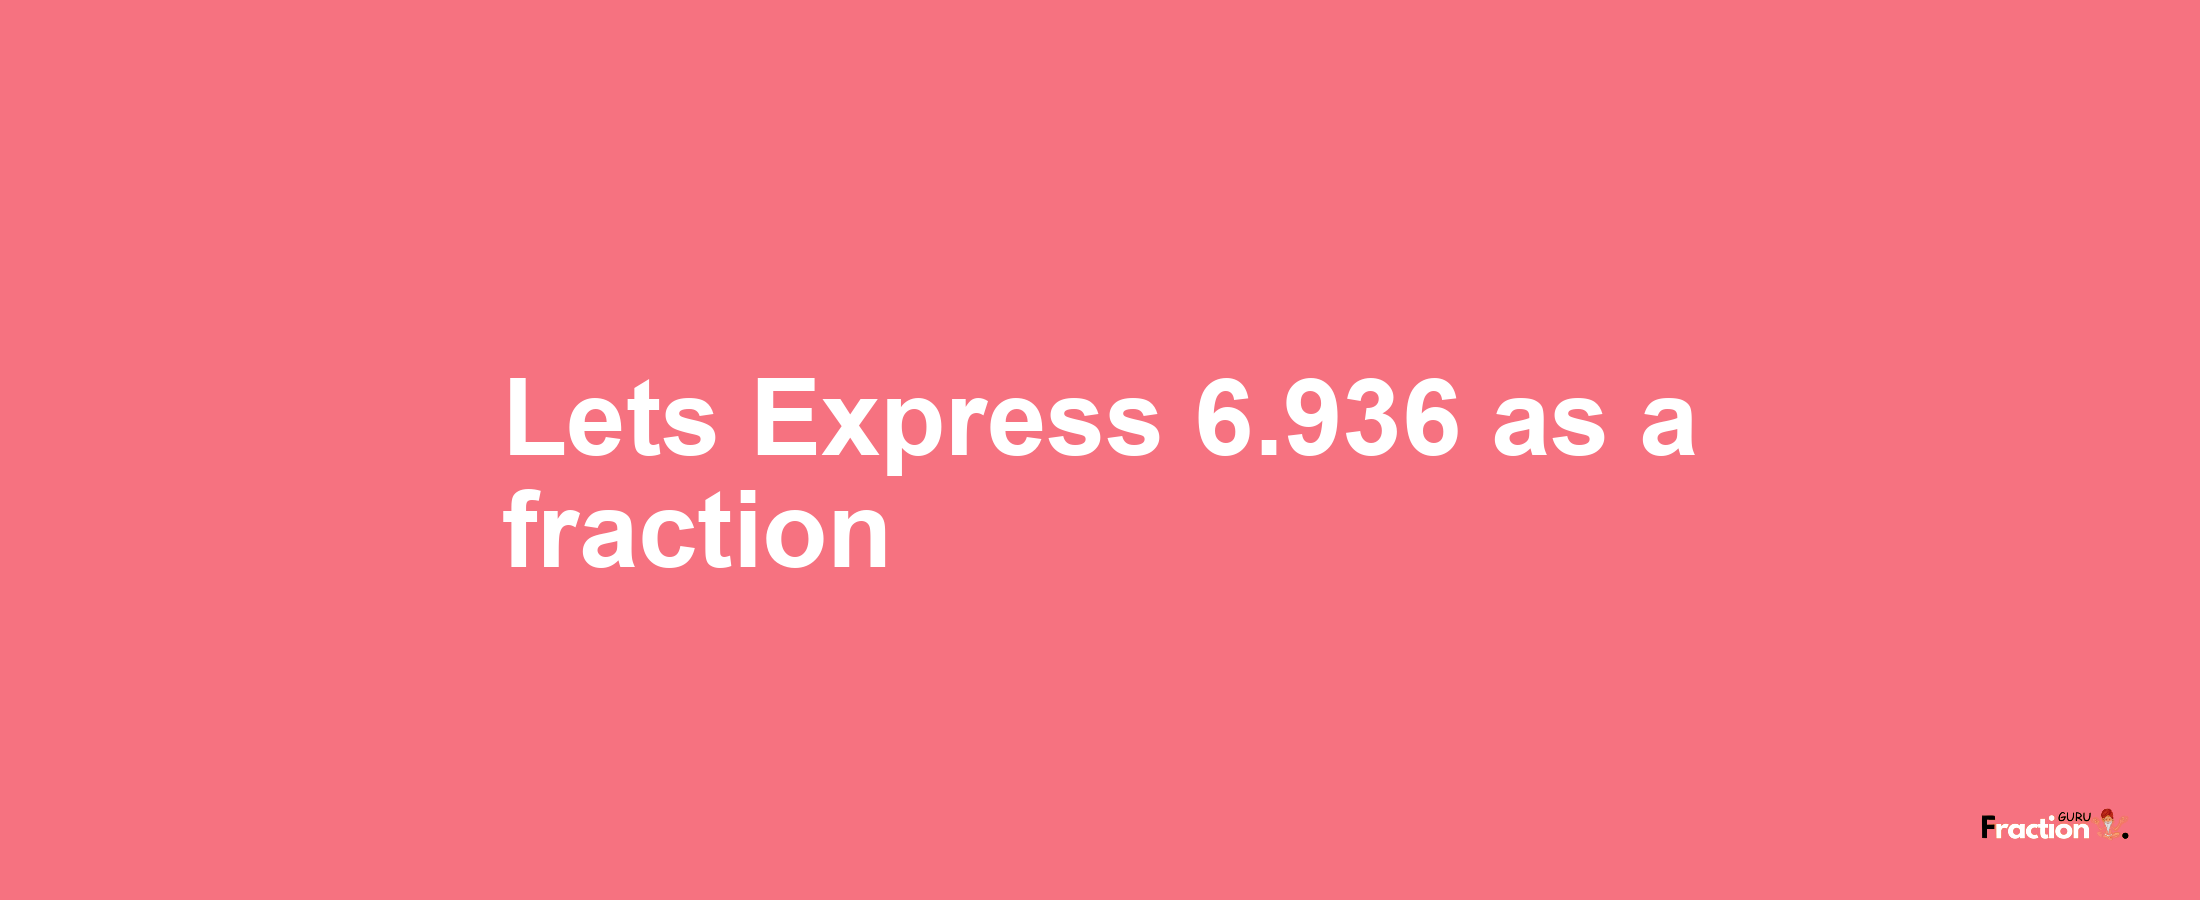 Lets Express 6.936 as afraction